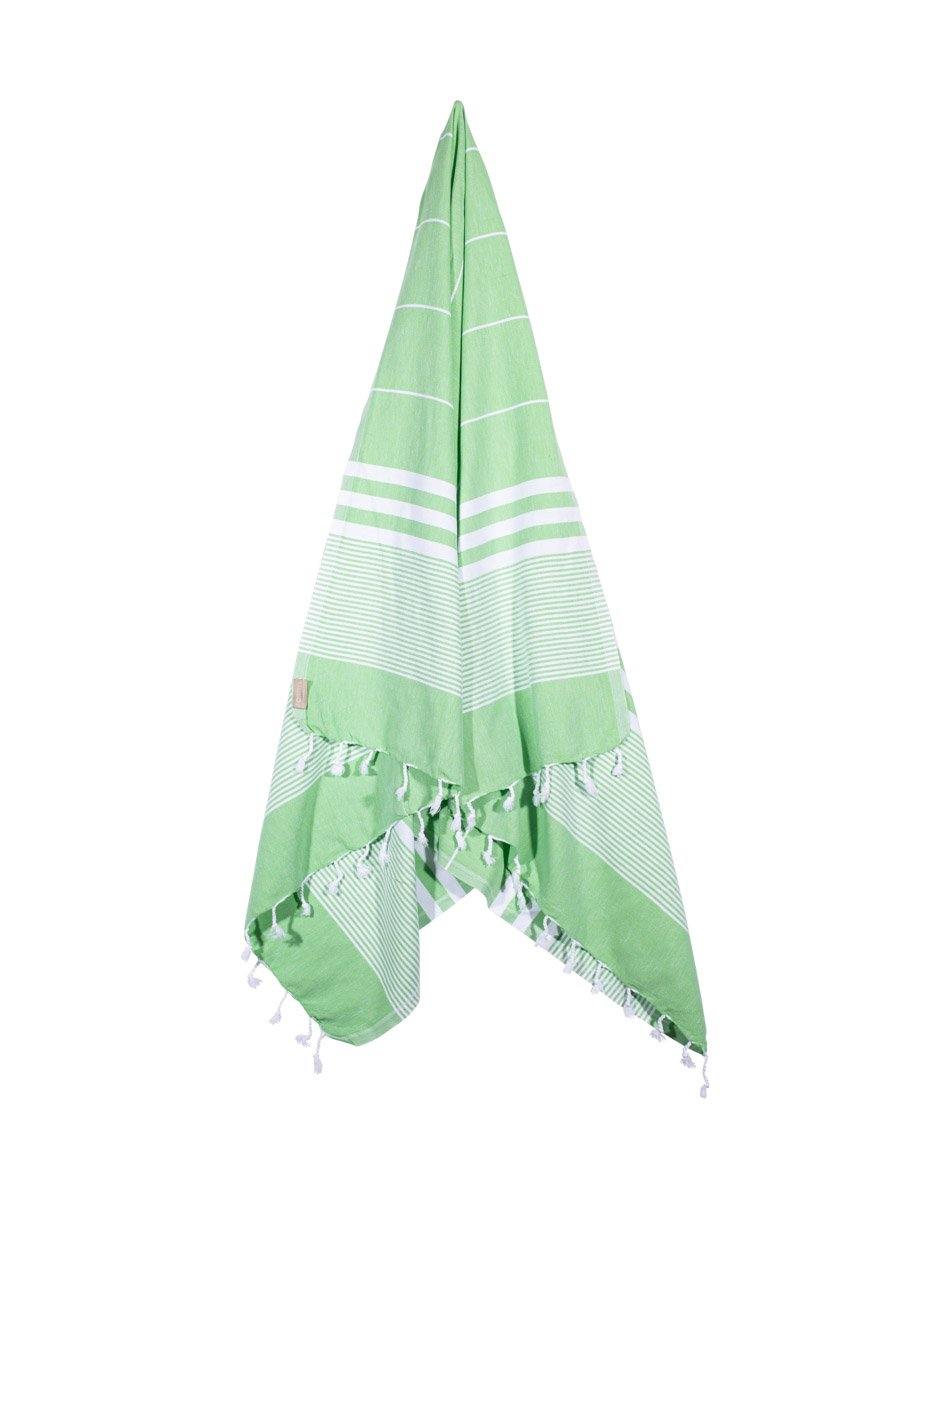 Kali - Green and White Striped Quick Drying Towel Hanging